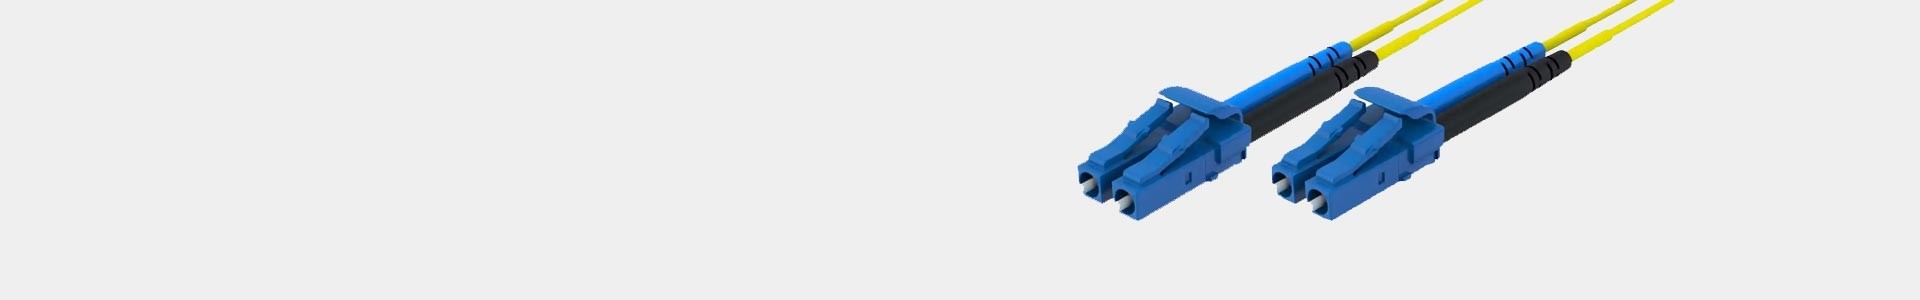 Fiber Optic Cables with the connector you need - Avacab